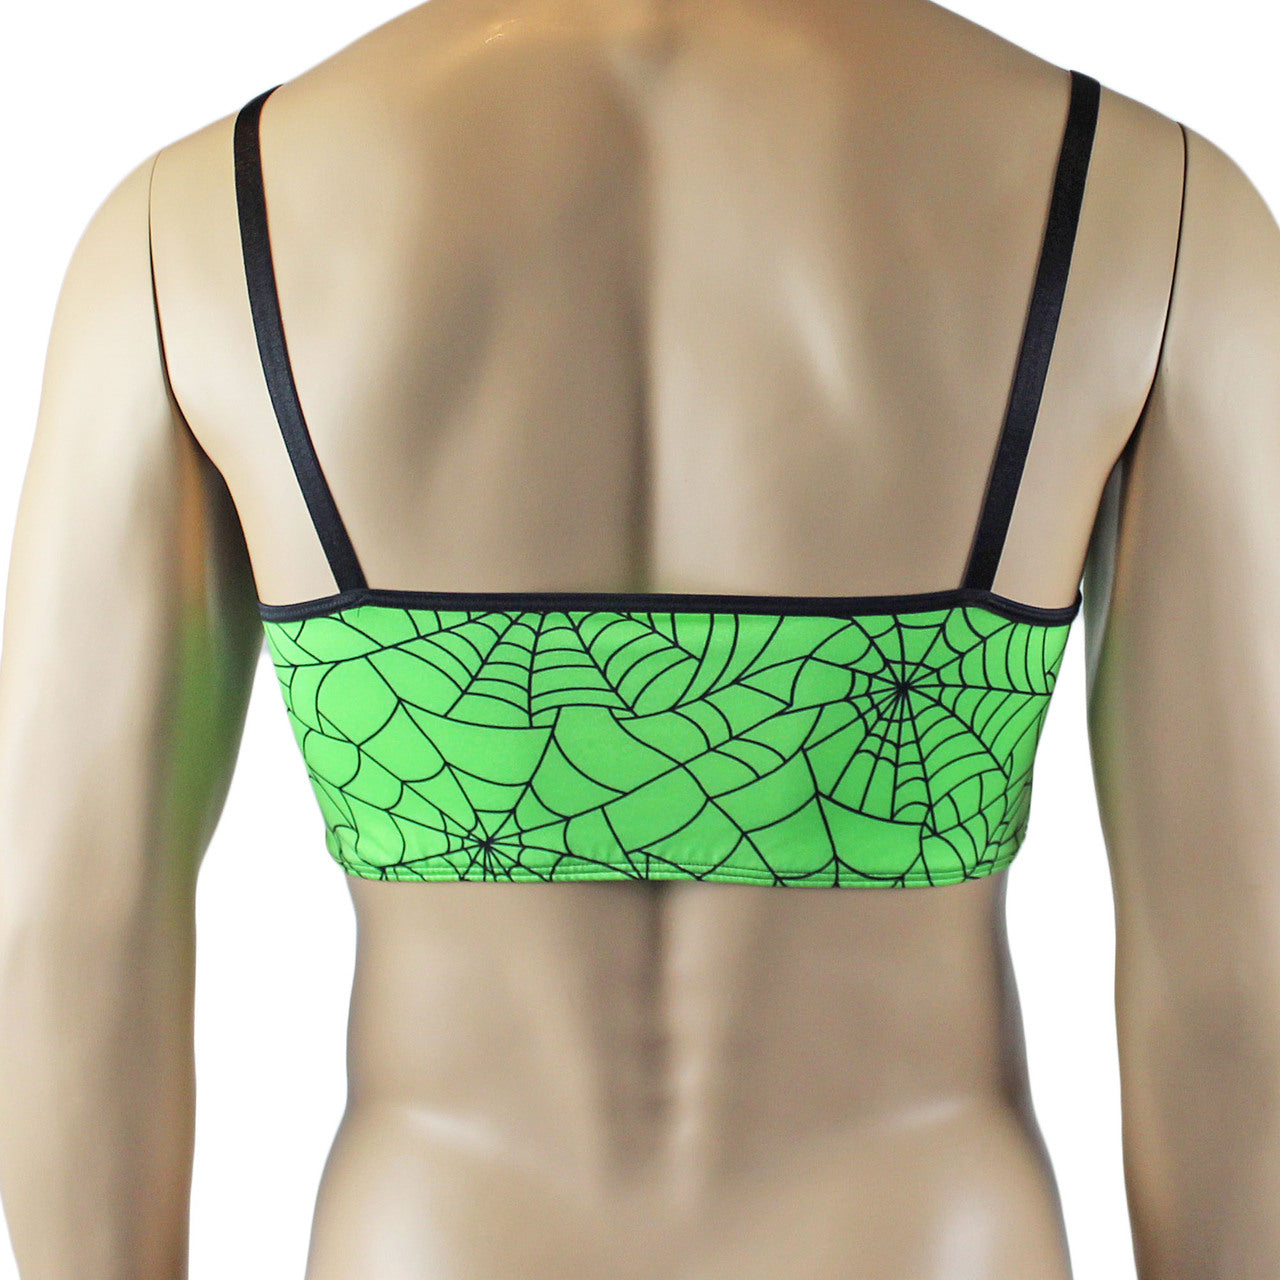 Mens Spider Web Camisole Bra Top Lime Green or Hot Pink